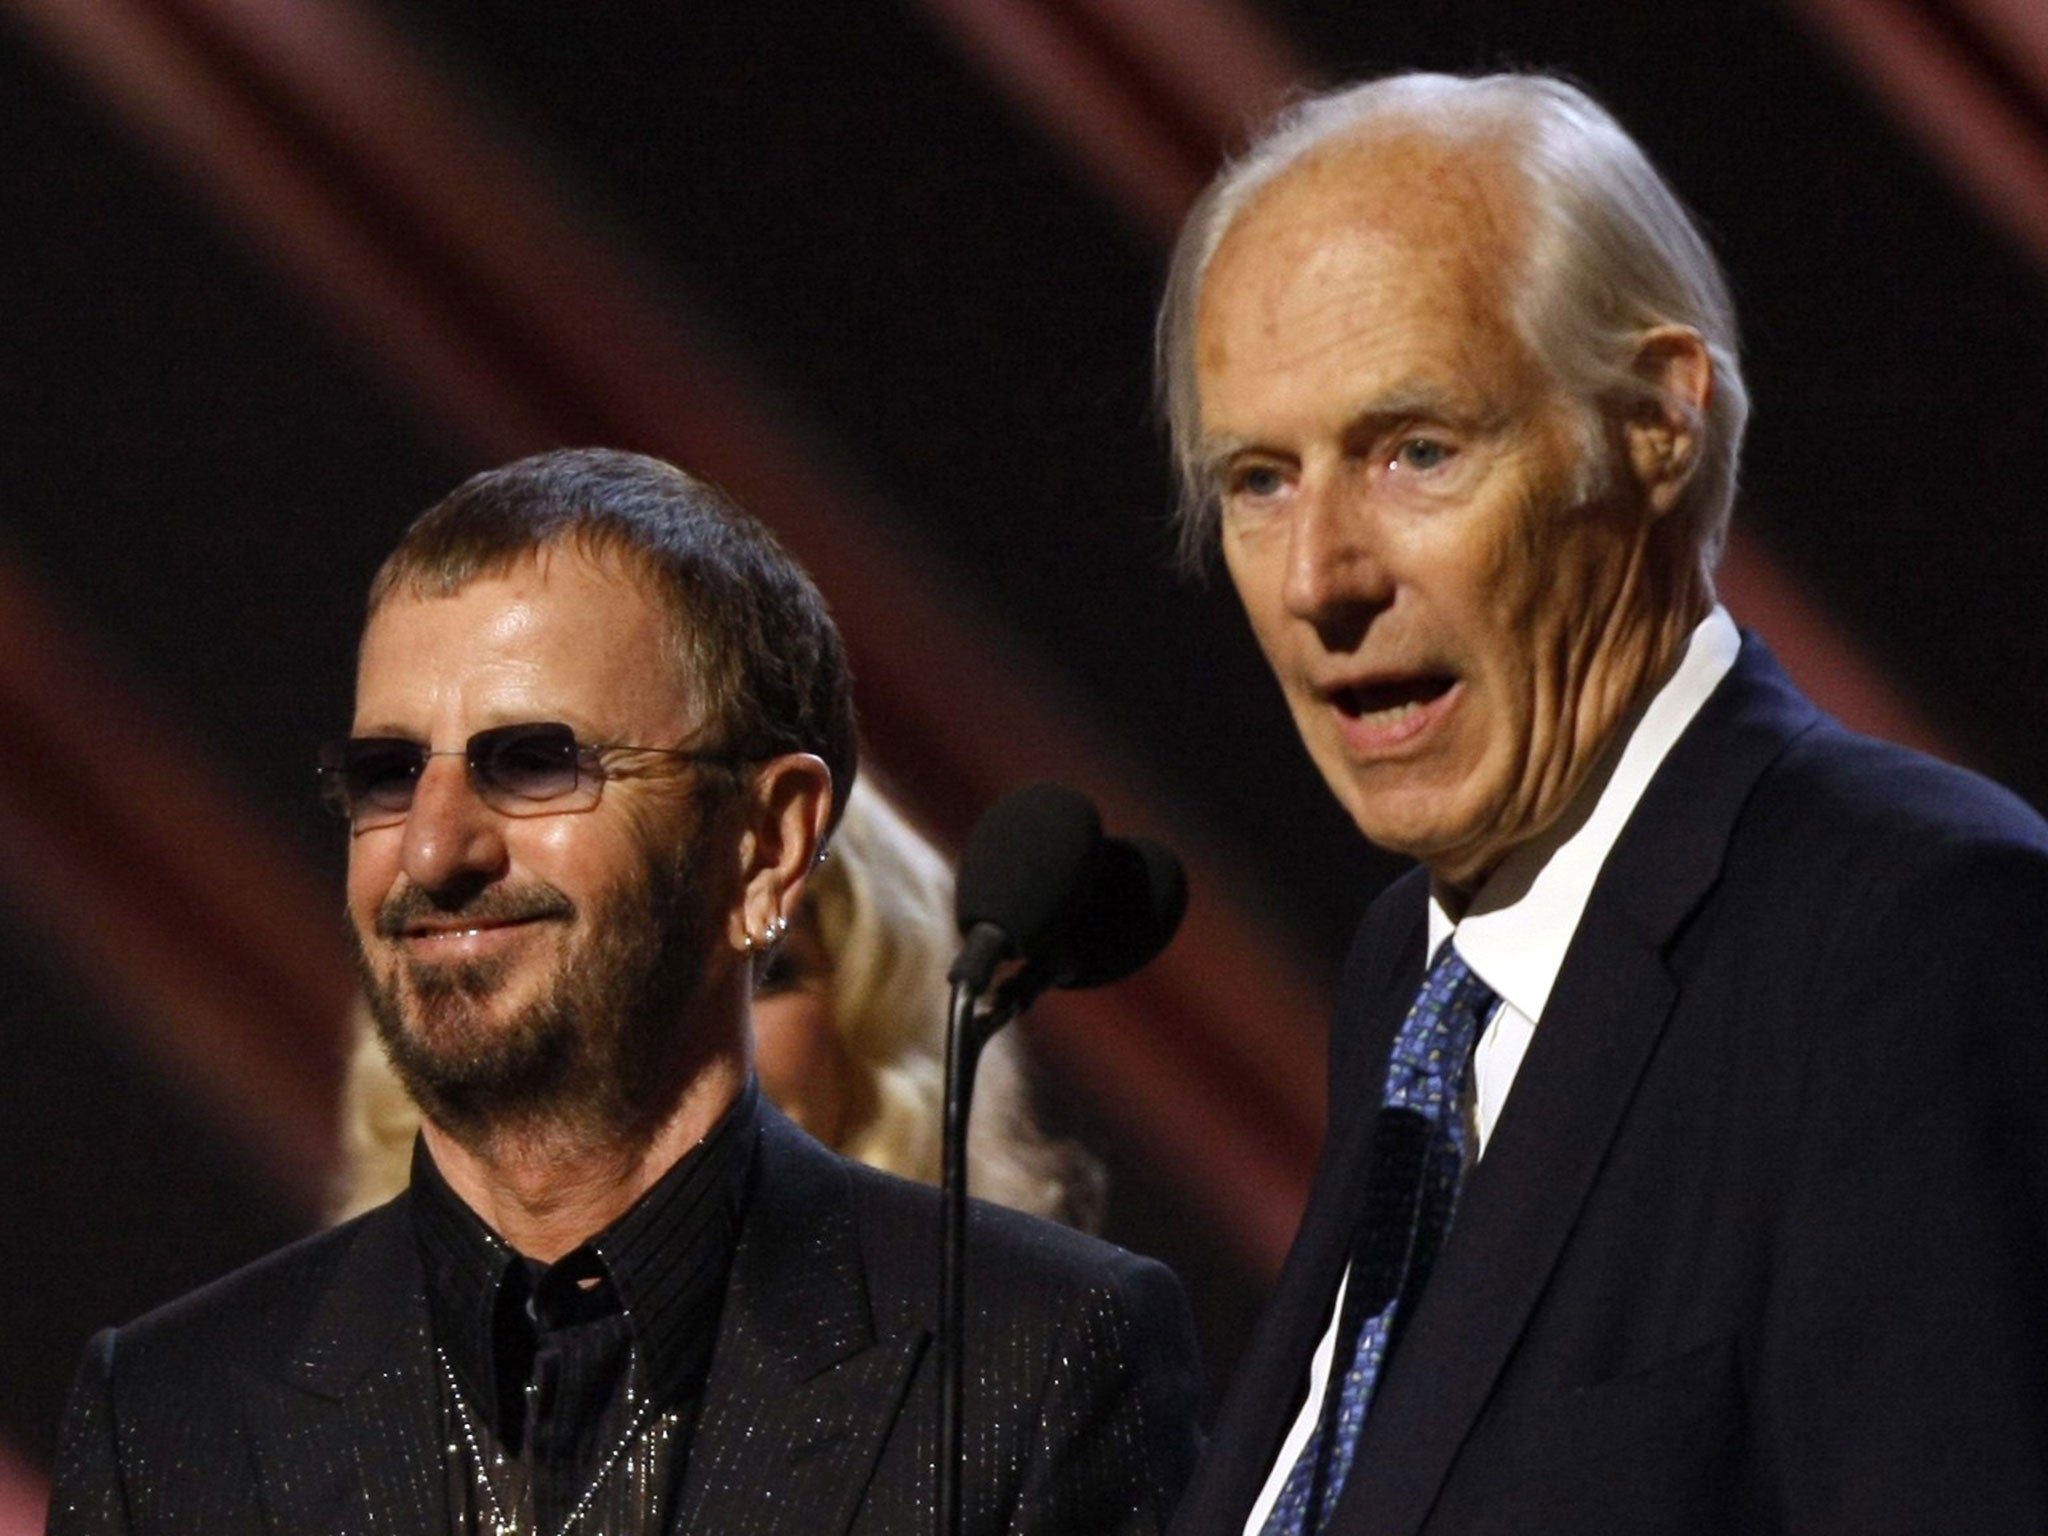 Sir George with Ringo Starr in 2008